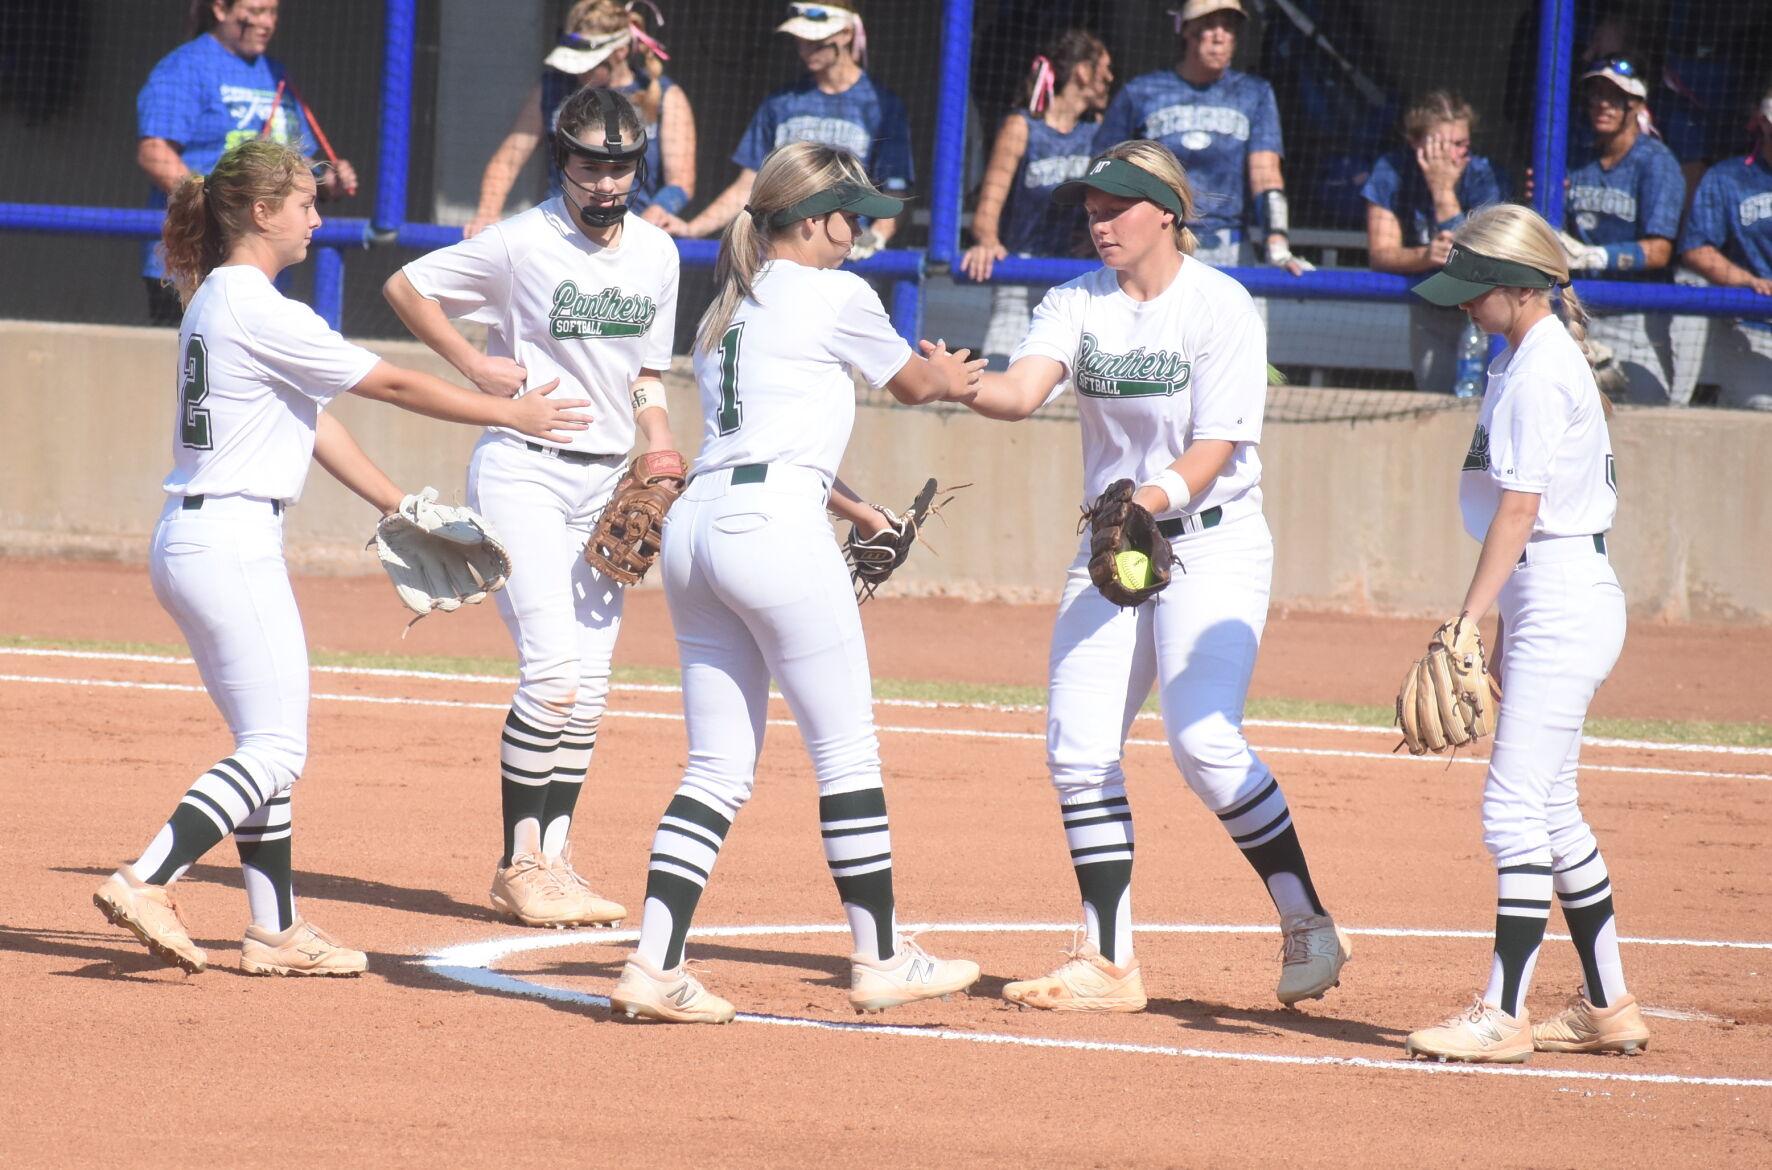 SOFTBALL ROUNDUP: Shorthanded Am-Po takes on Stroud at state tournament